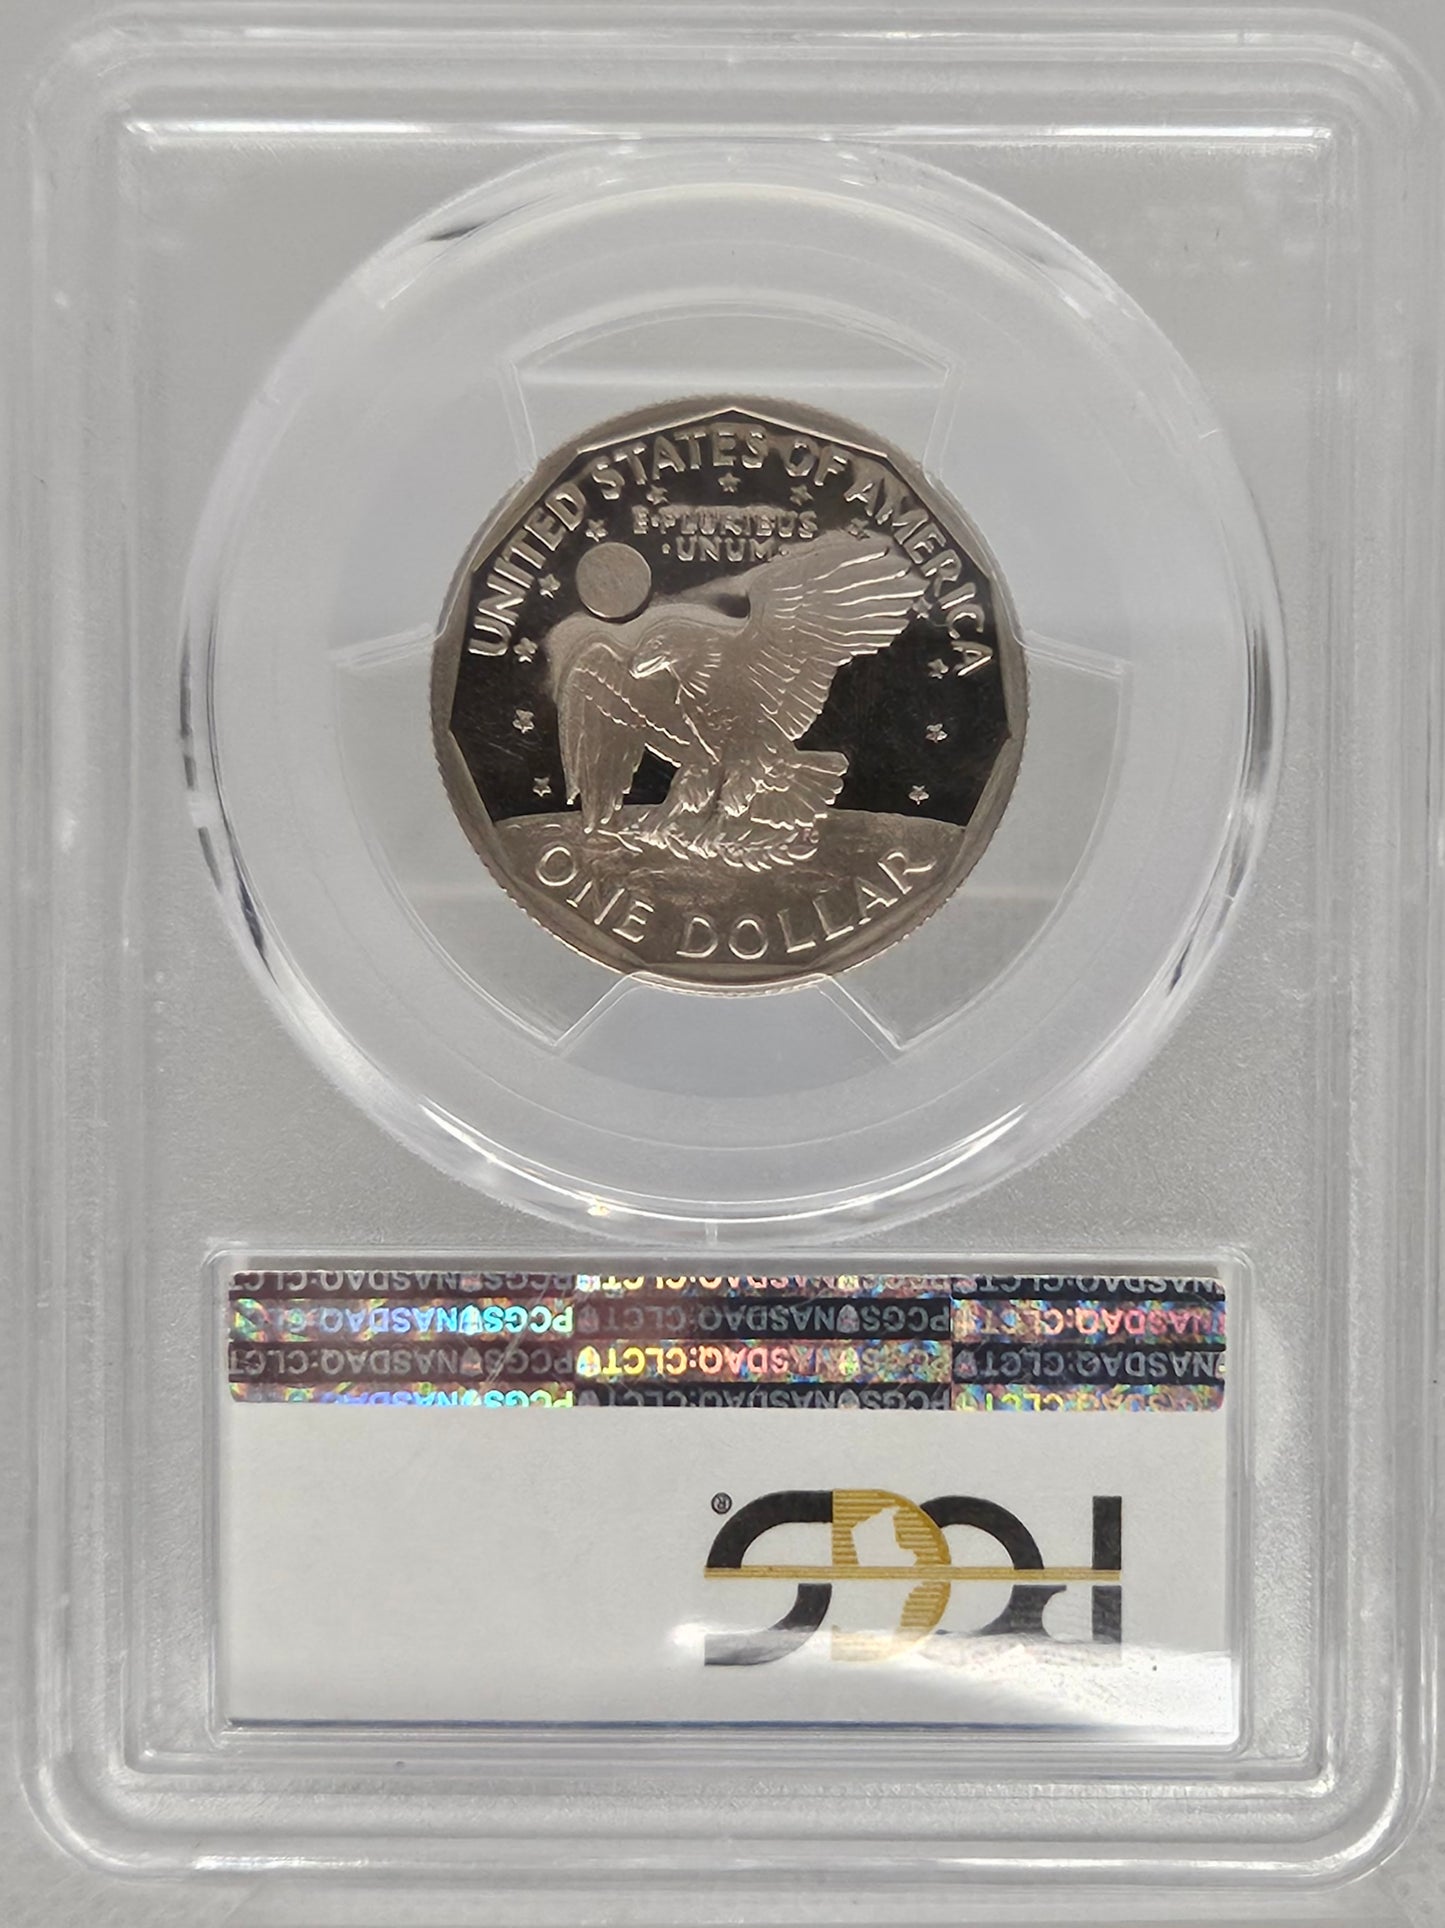 1979-S Susan B. Anthony Dollar PCGS PR69 DCAM Type 2 Harder to Find SBA Proof Coin Variety!!